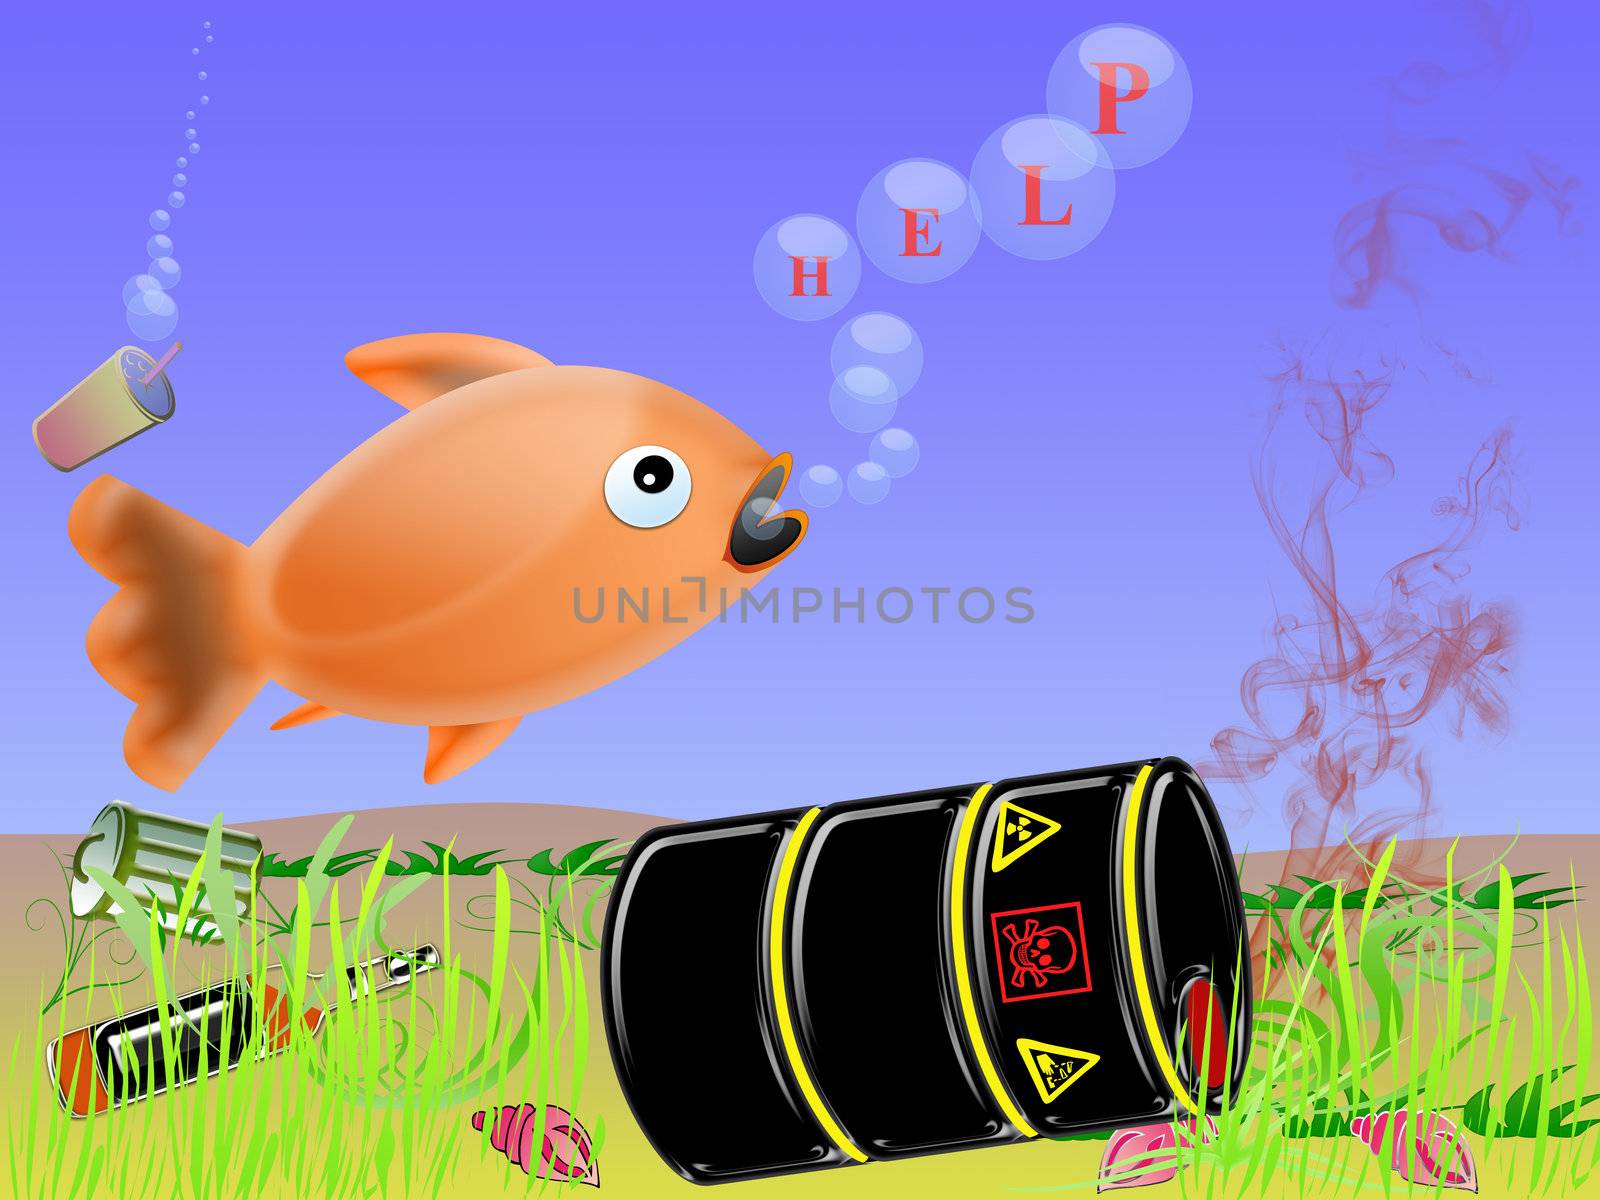 concept of danger, pollution of the sea. fish asks for help
